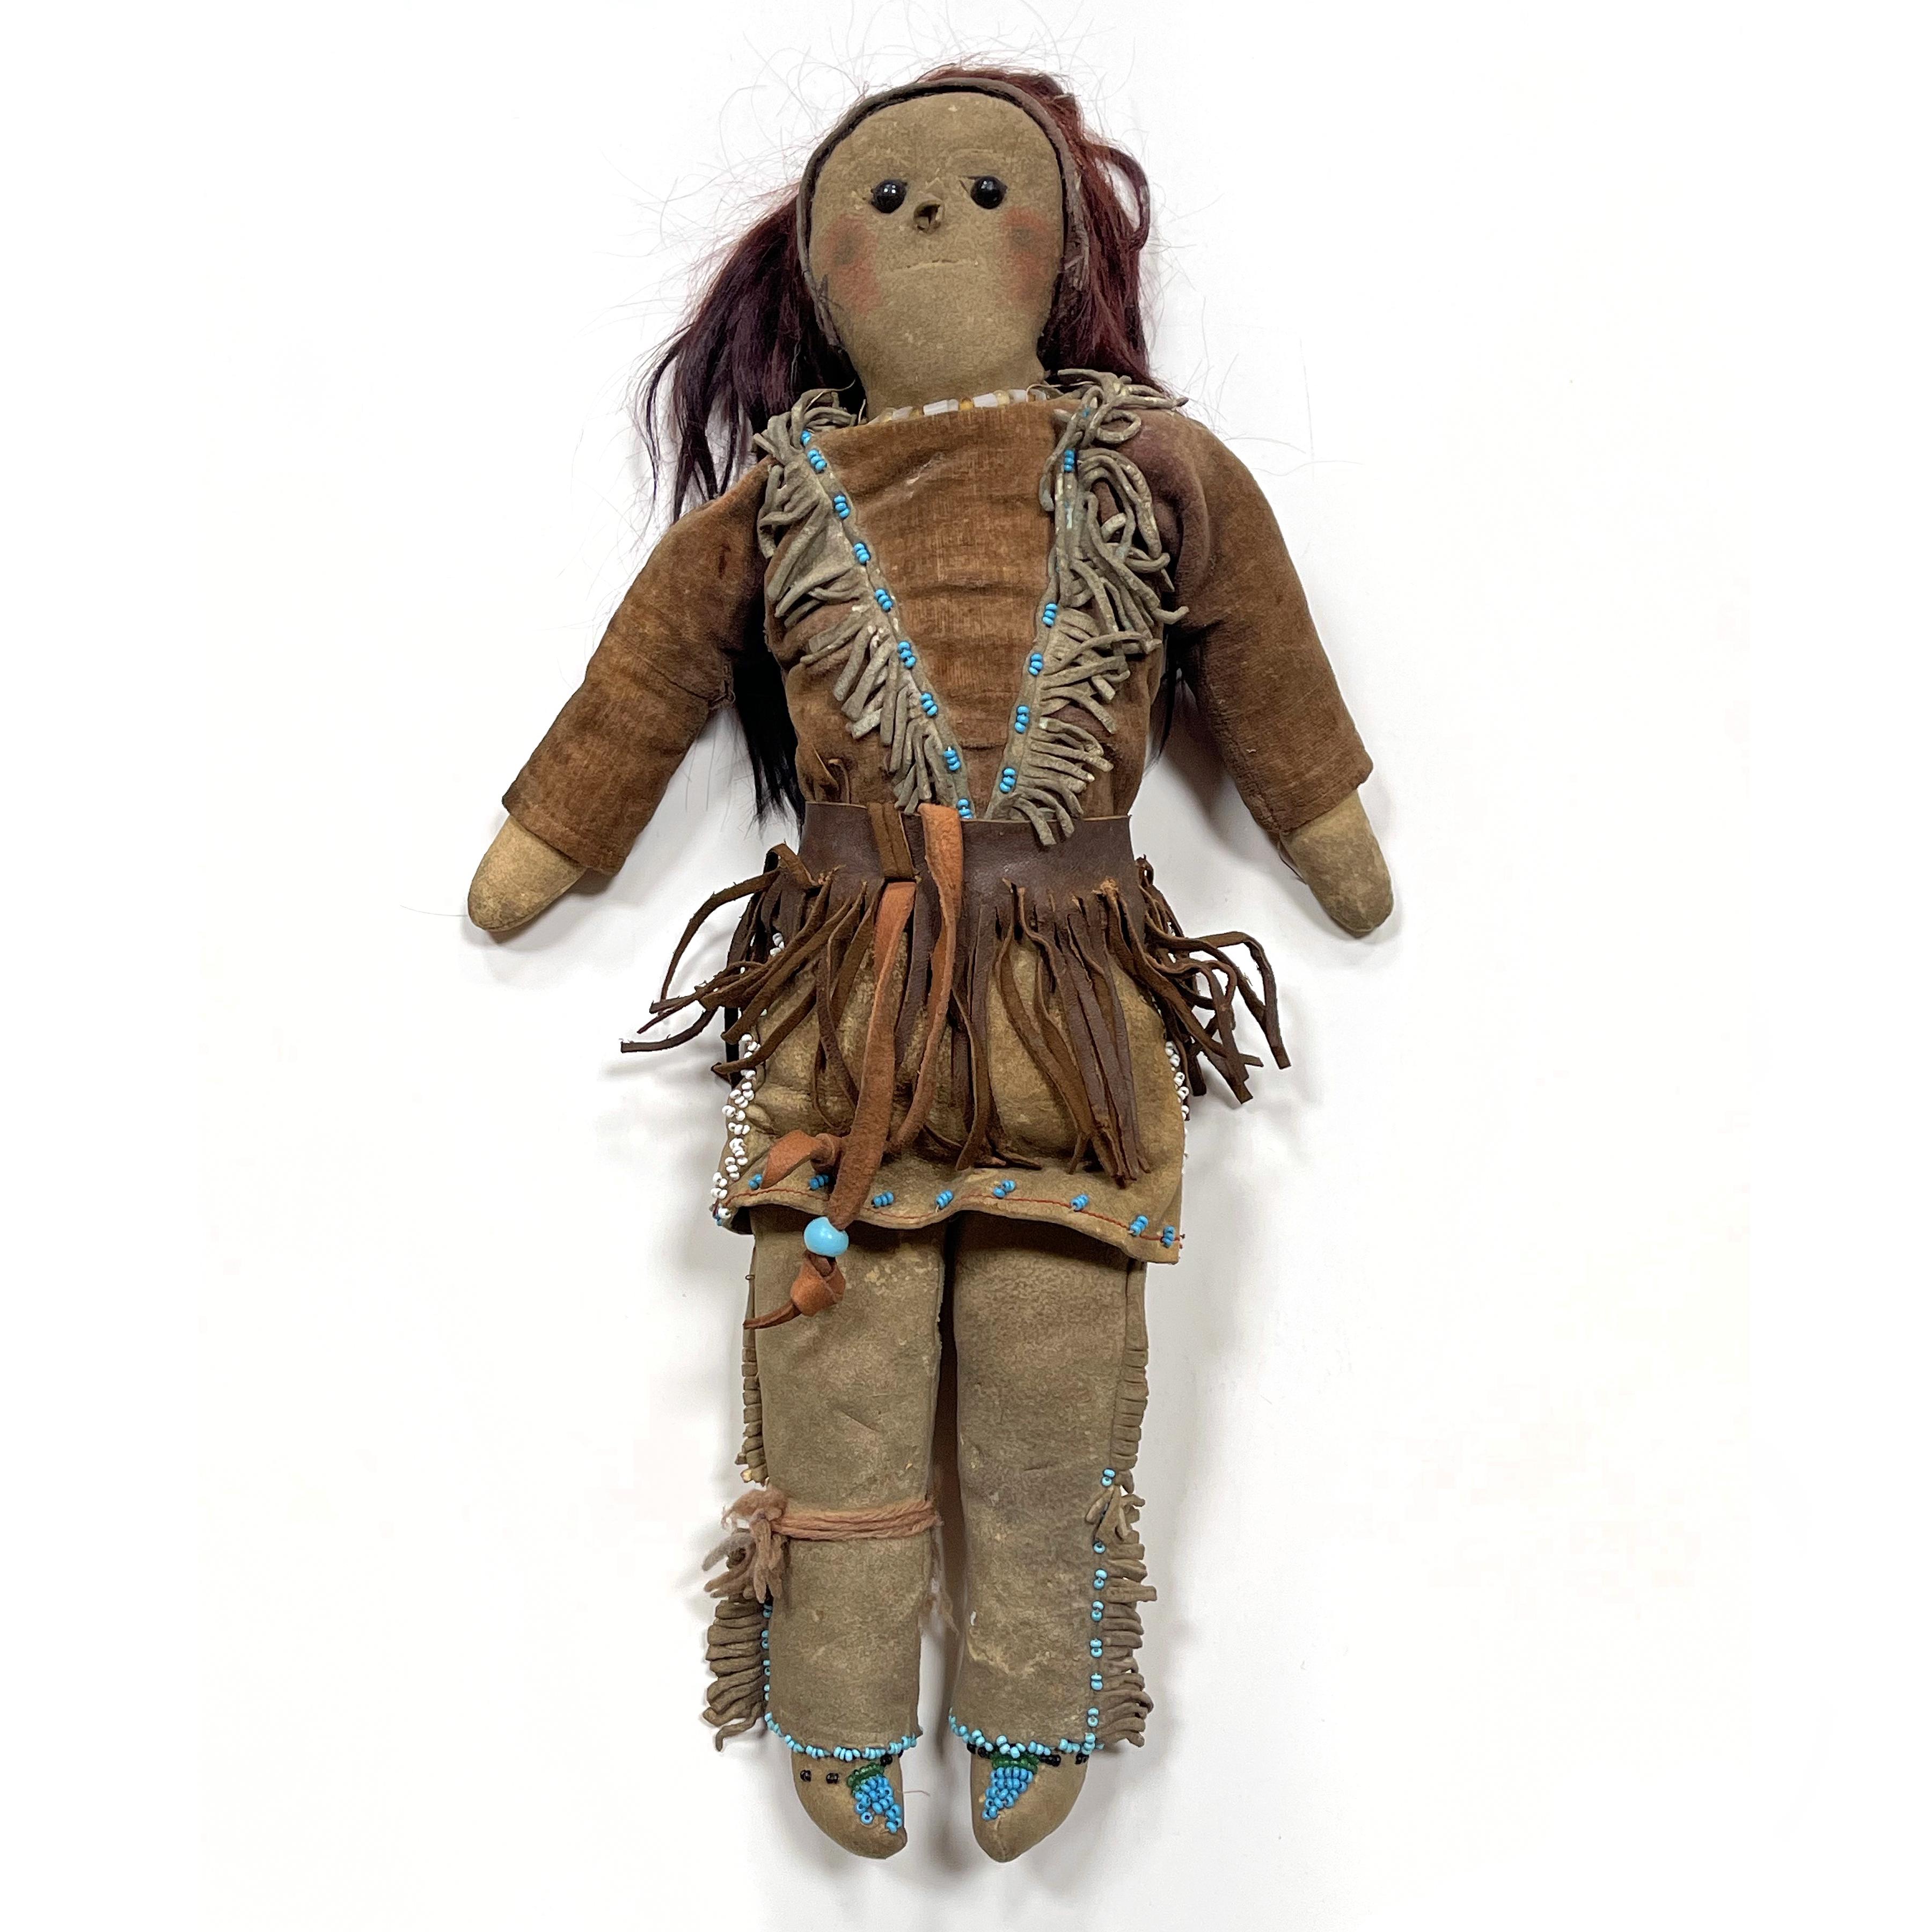 Here is an exceptional piece, fresh from a vintage estate.

This beautiful antique Native American doll has incredible presence and a fantastic patina from years of play. Measuring 15